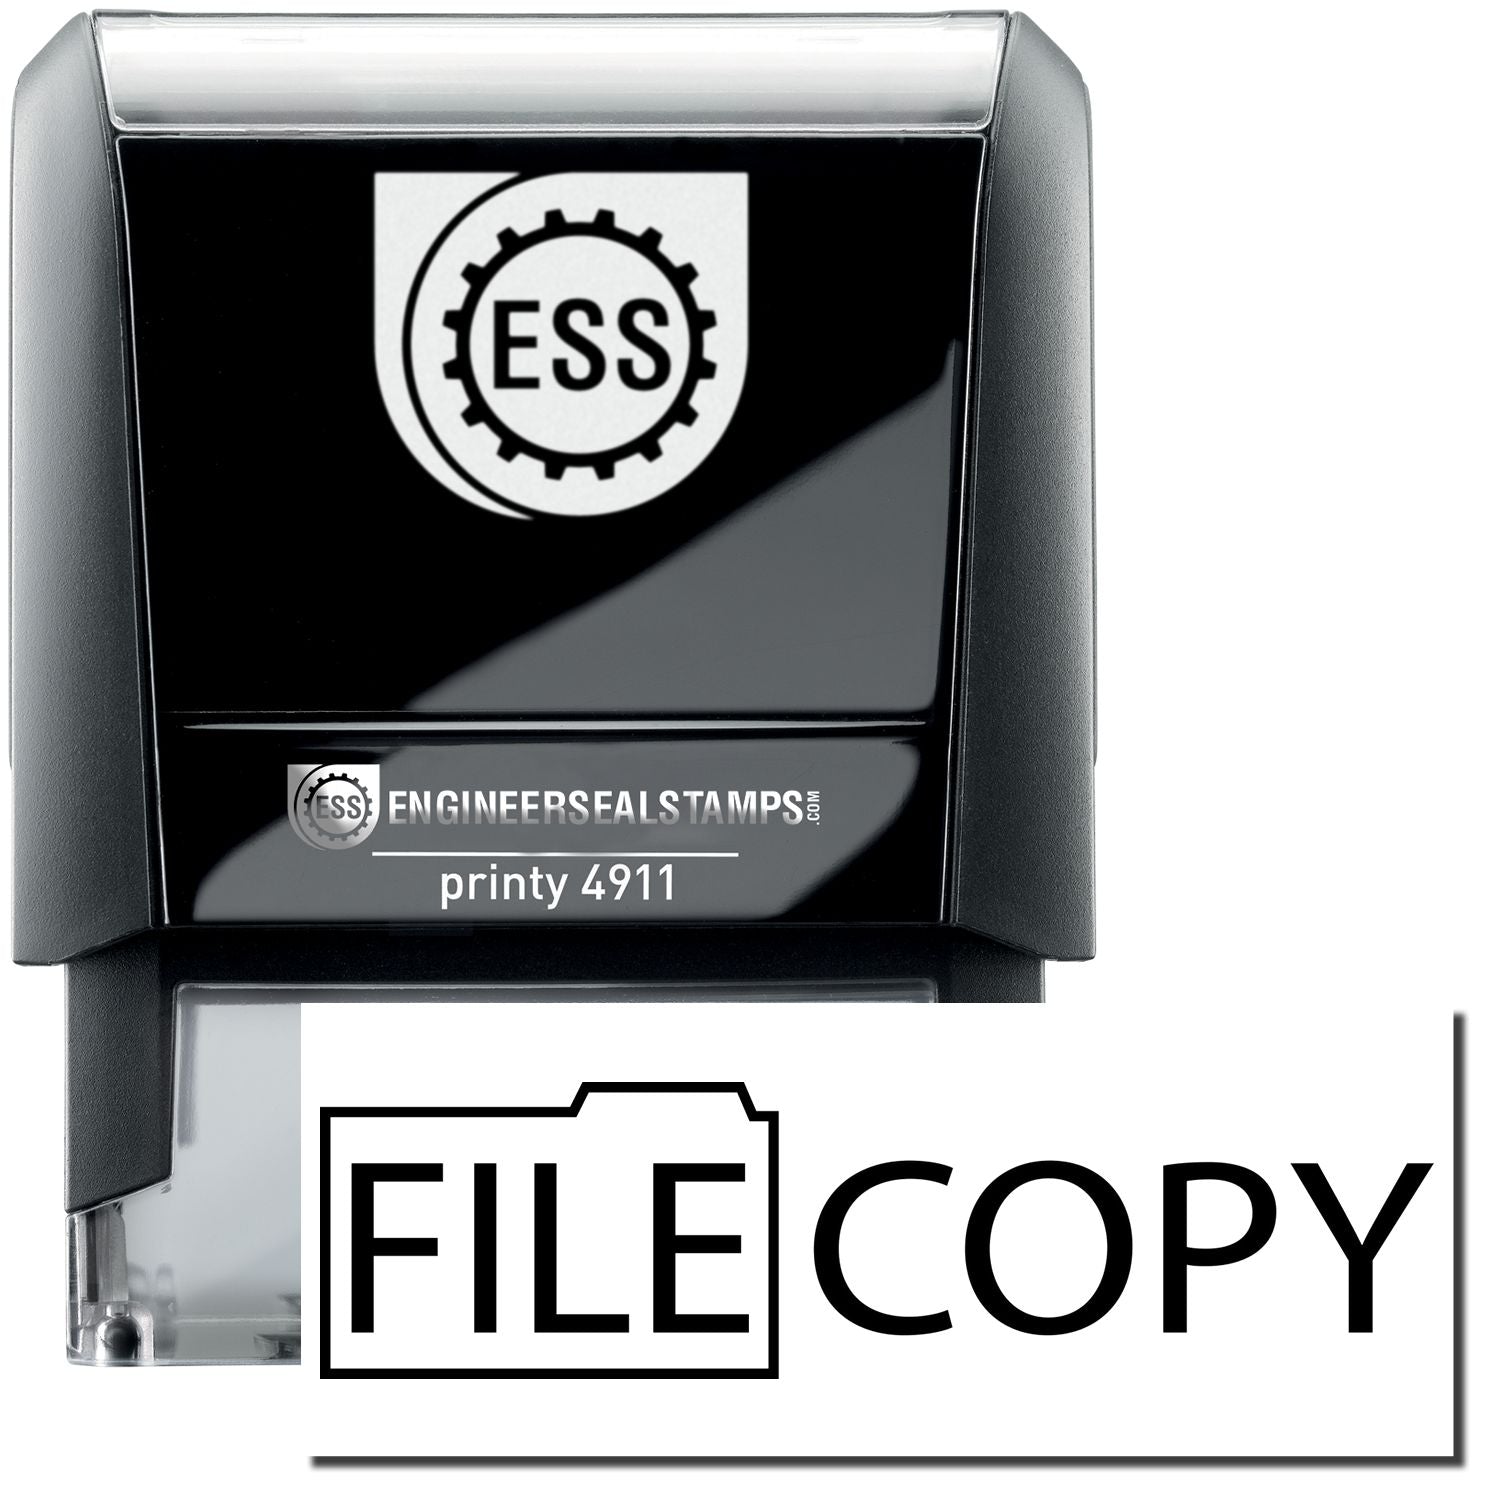 A self-inking stamp with a stamped image showing how the text "FILE COPY" with a graphic of a folder is displayed after stamping.